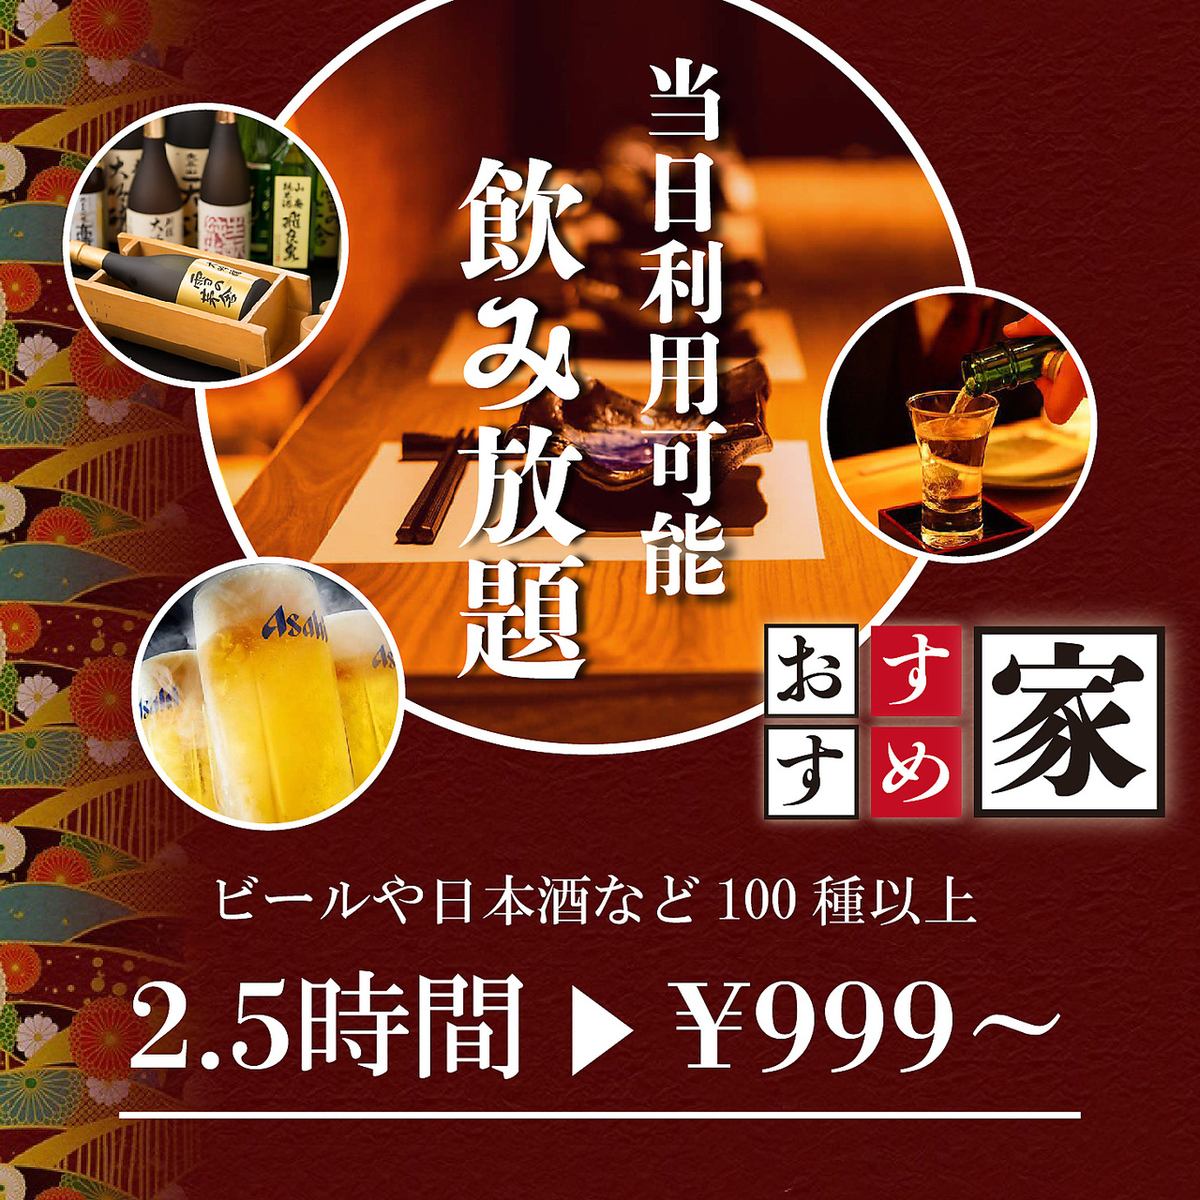 All-you-can-drink for 2.5 hours on the day for 980 yen. Definitely a great deal now!! [5x bonus points]